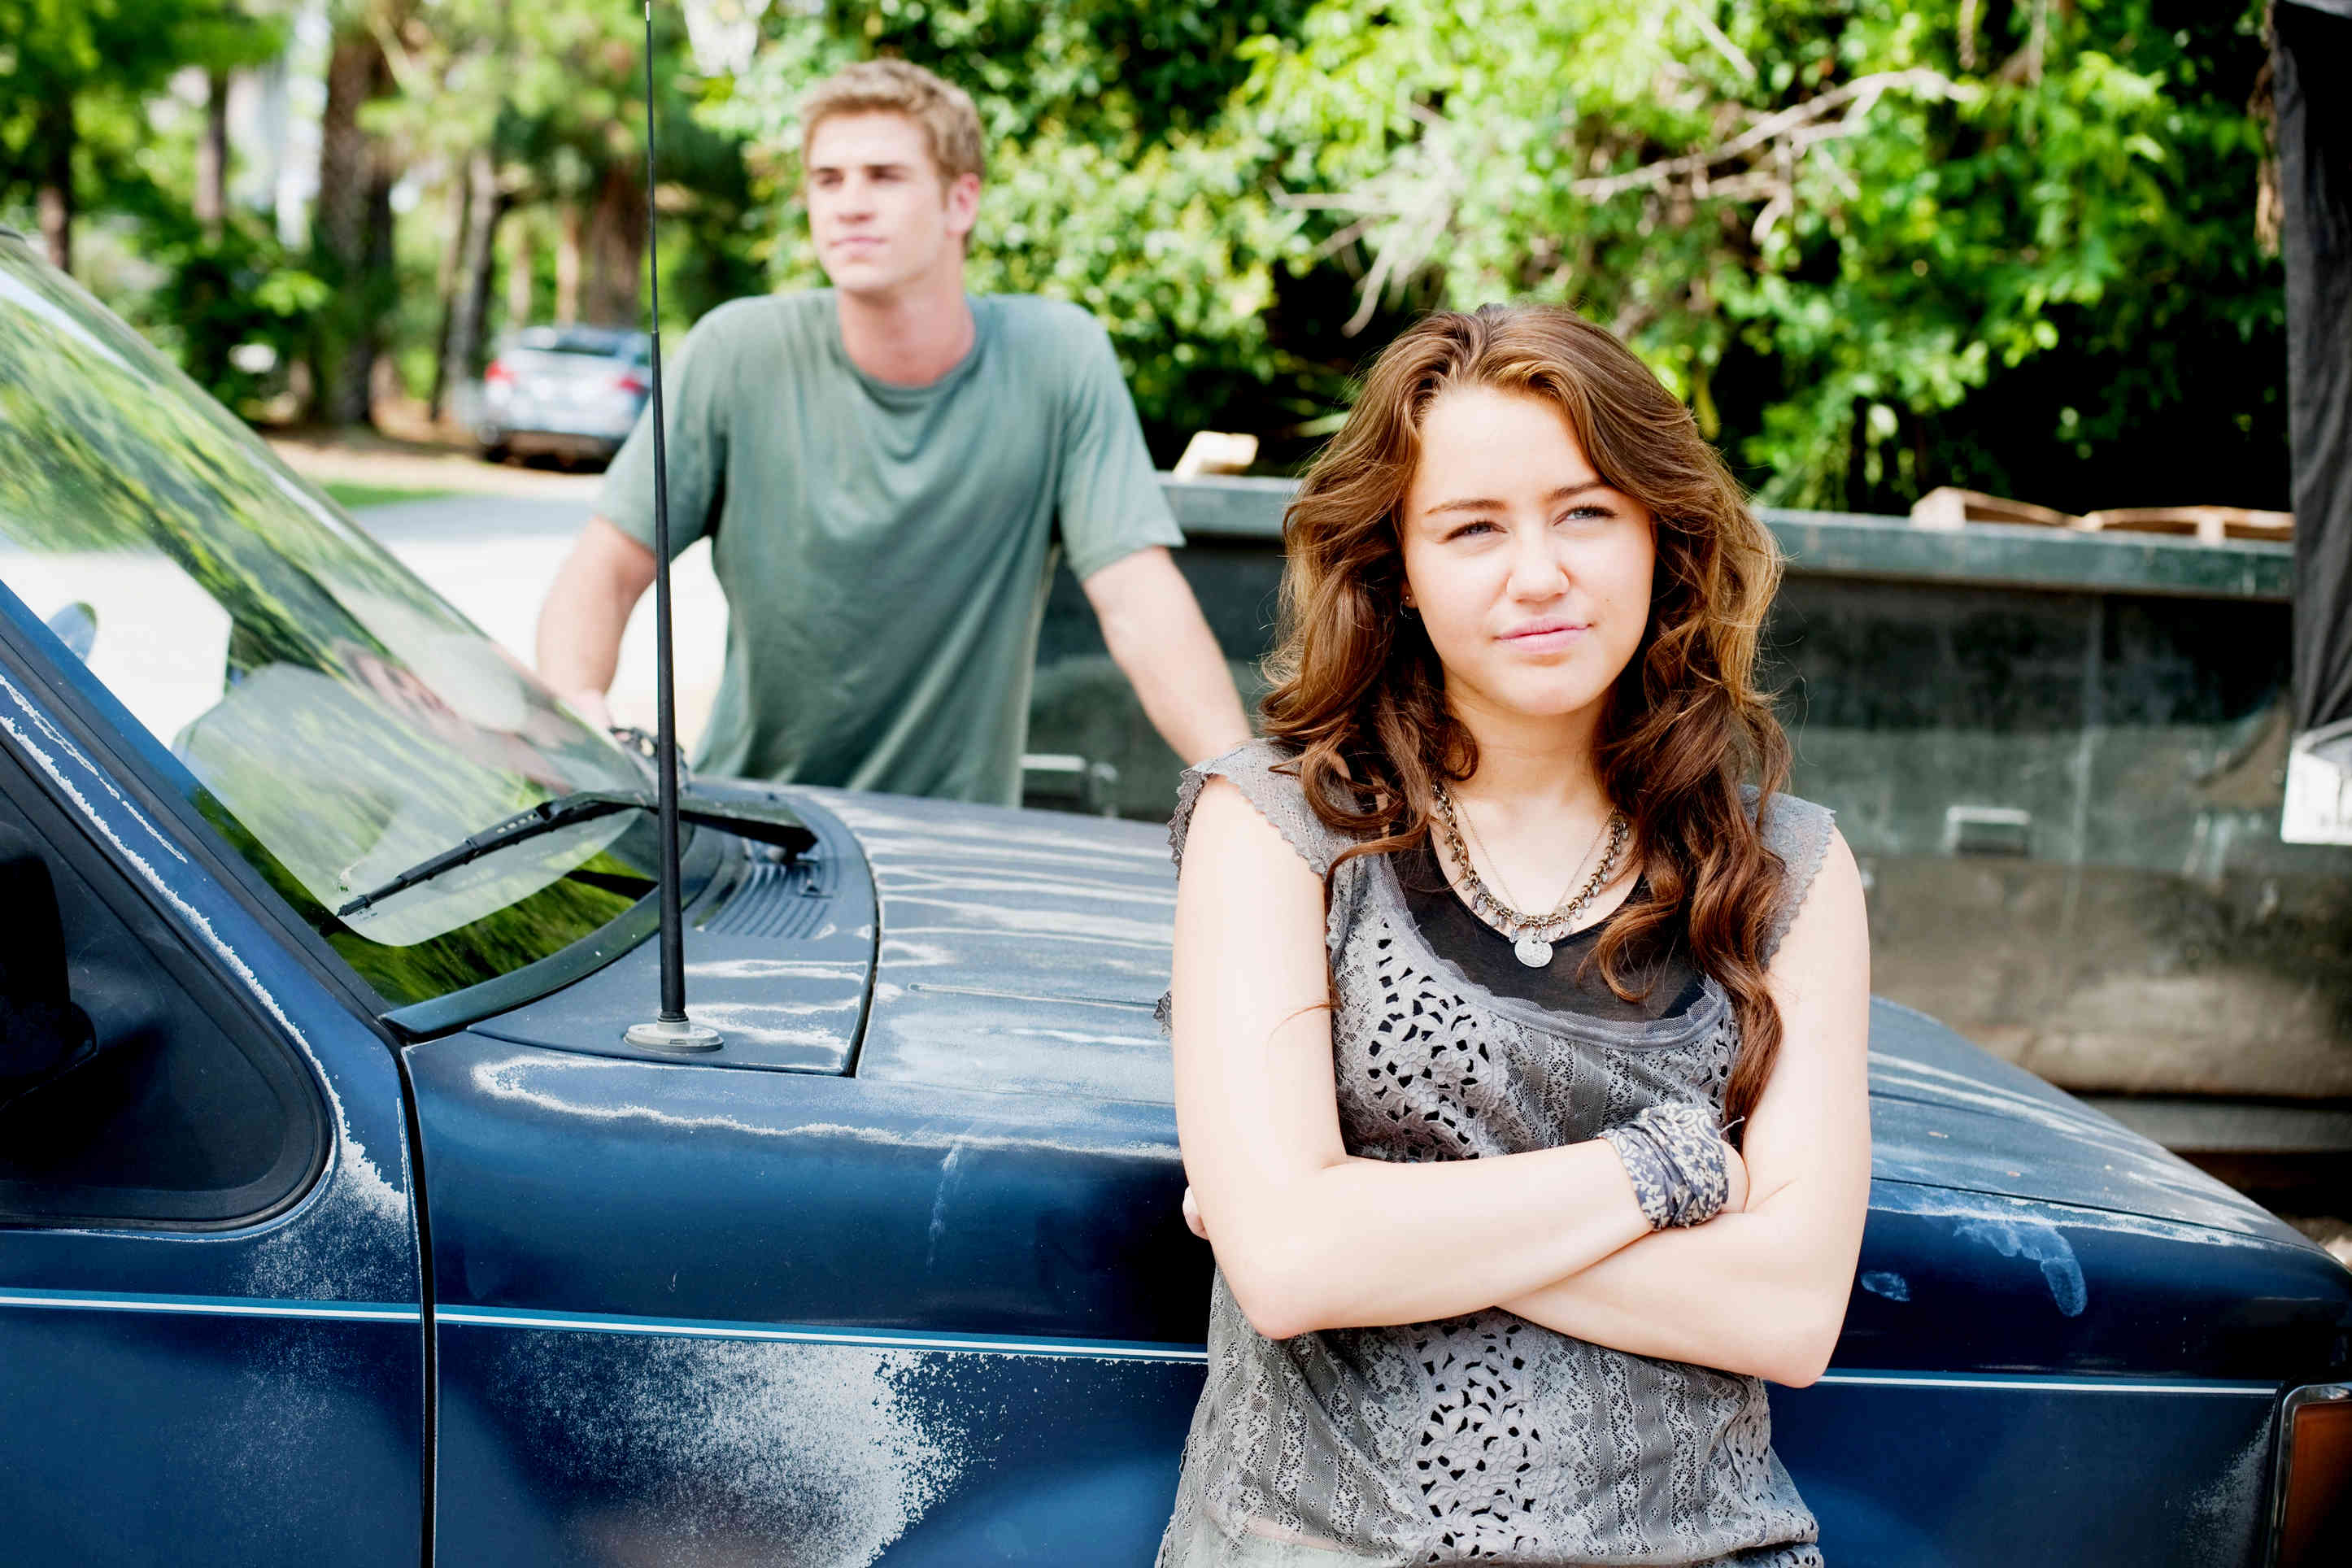 Liam Hemsworth stars as Will Blakelee and Miley Cyrus stars as Veronica 'Ronnie' Miller in Walt Disney Pictures' The Last Song (2010)